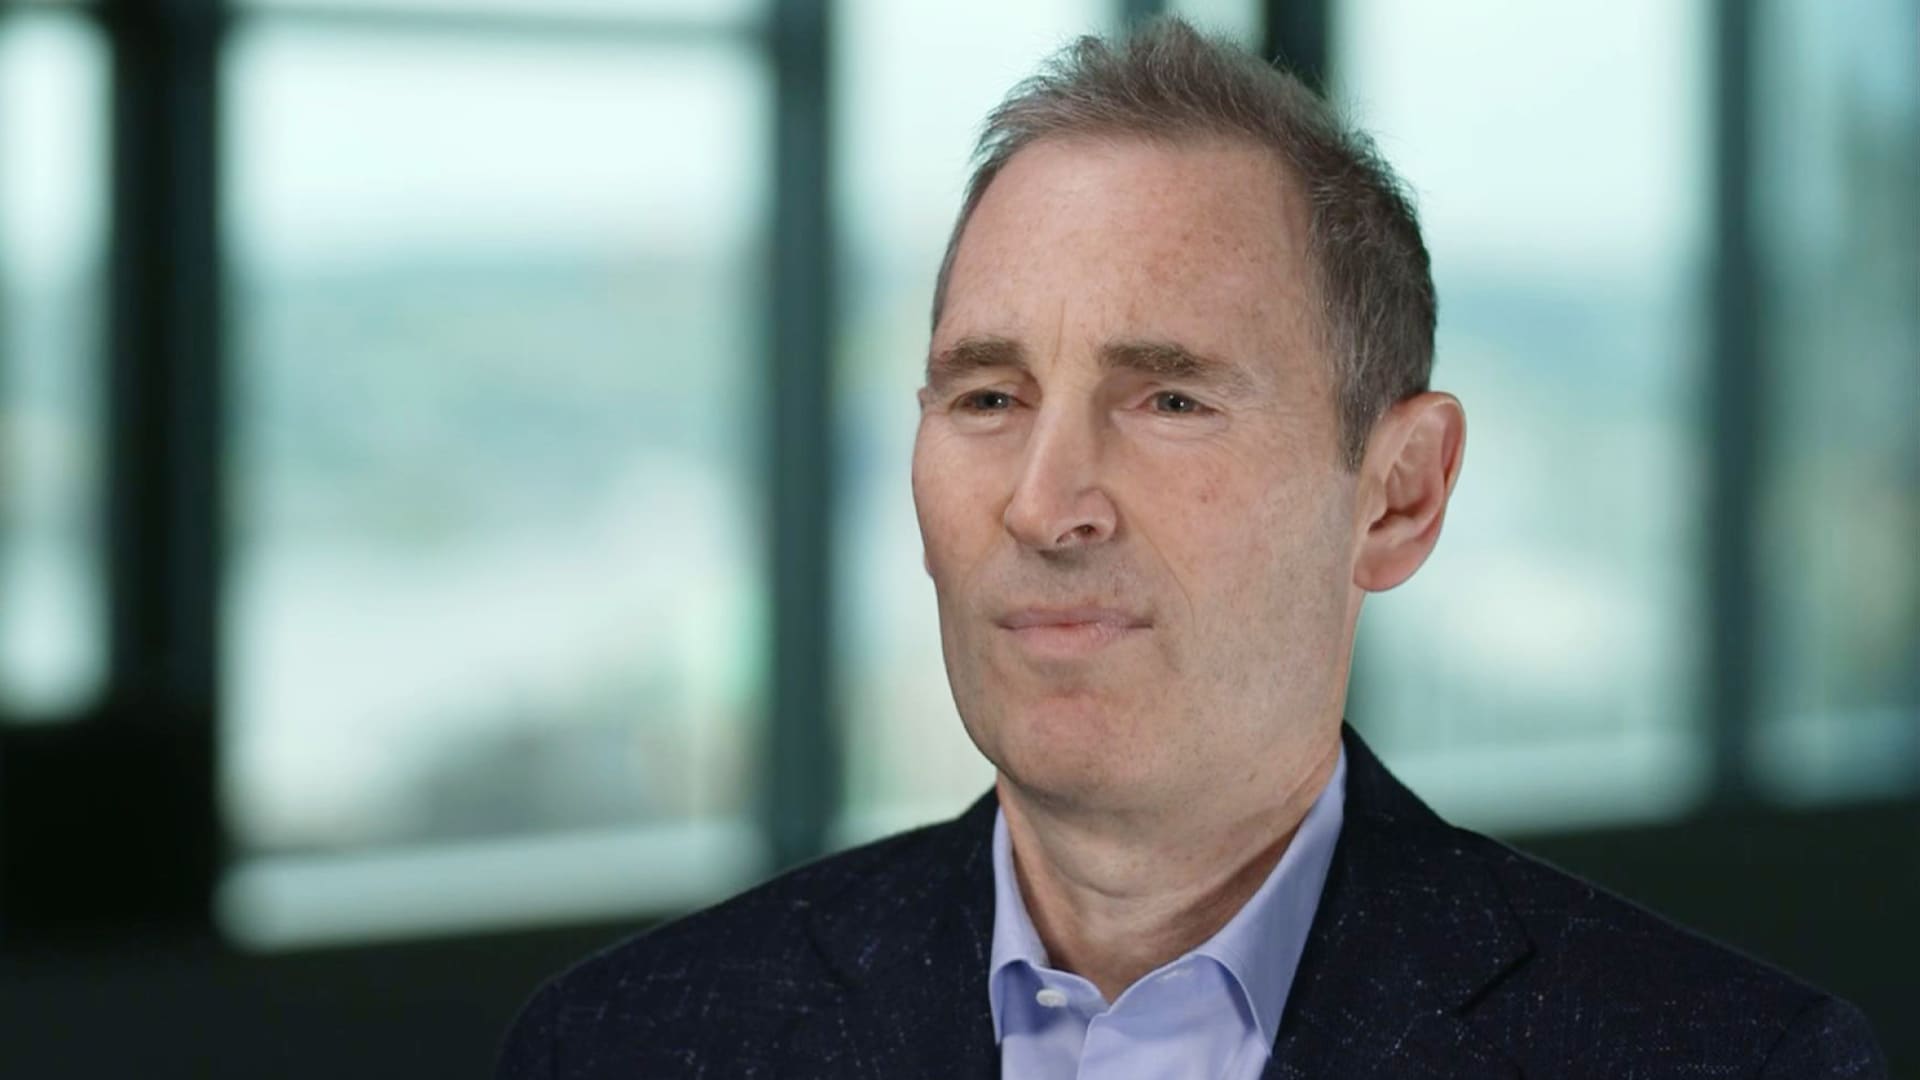 Andy Jassy says he doesn’t own bitcoin, says Amazon could sell NFTs